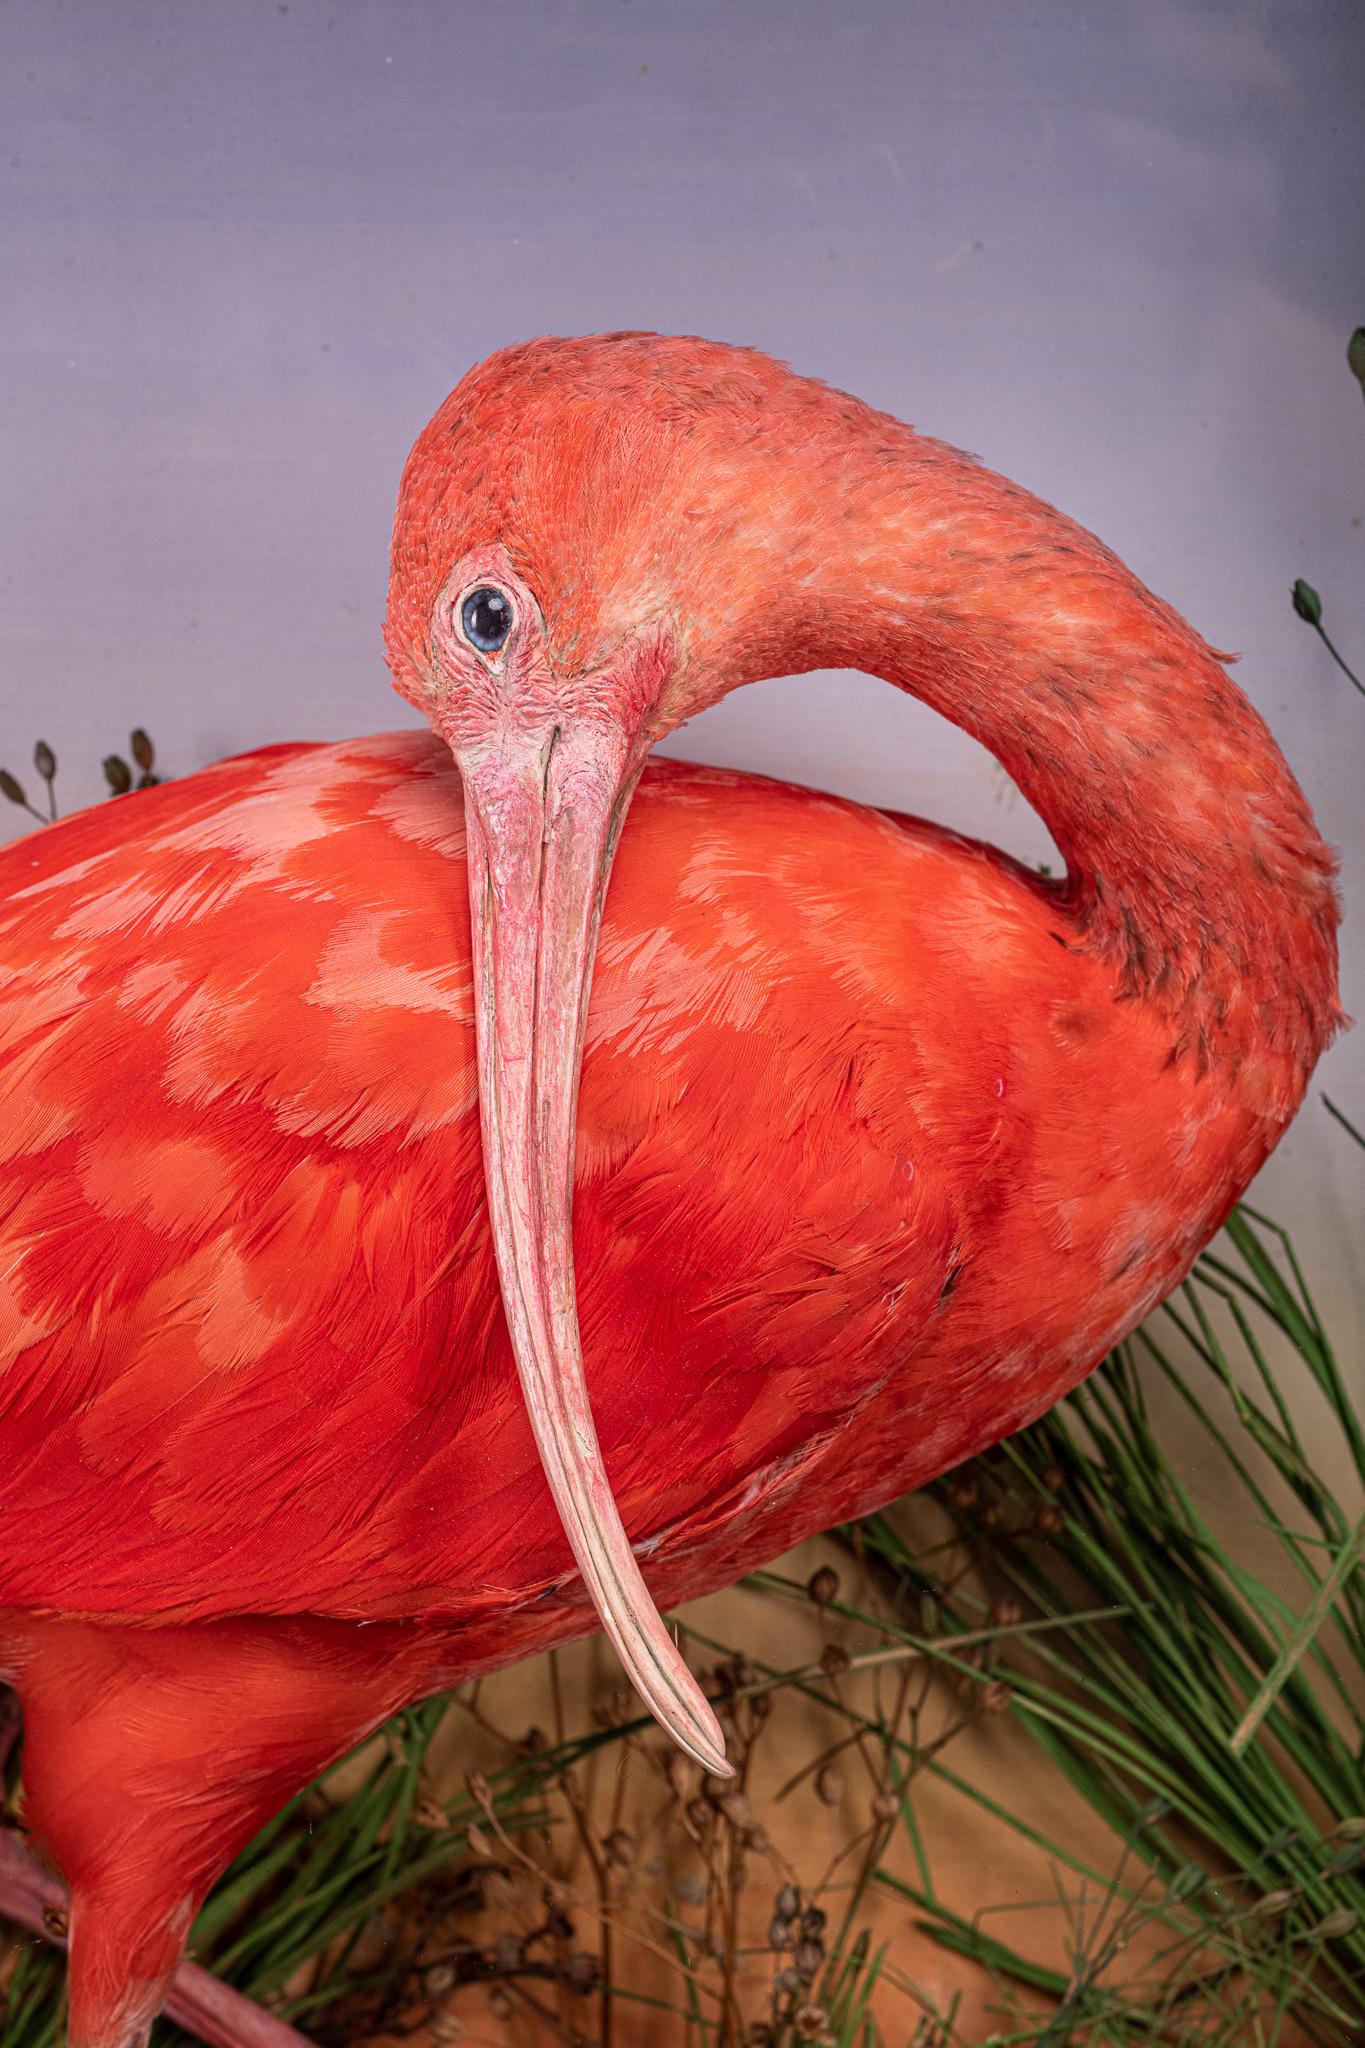 The scarlet ibis is native to South America. This striking resident bird has bright, orange-red plumage with black wing tips and a long, curved bill. This plumage is the same in both sexes. Scarlet ibises mainly find their food by touch, by pricking